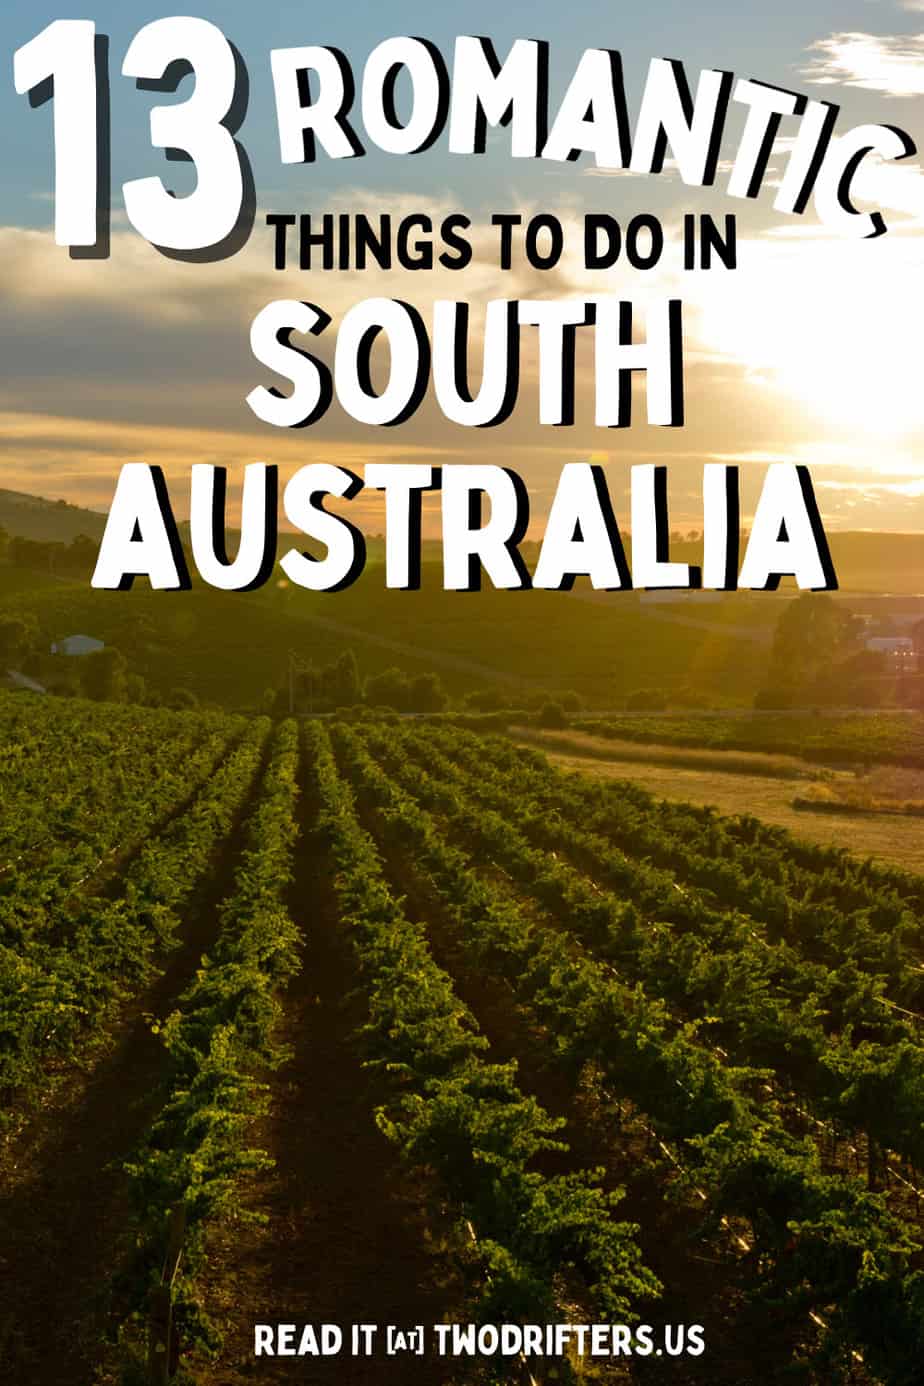 Pinterest social image that says “13 romantic things to do in South Australia.”